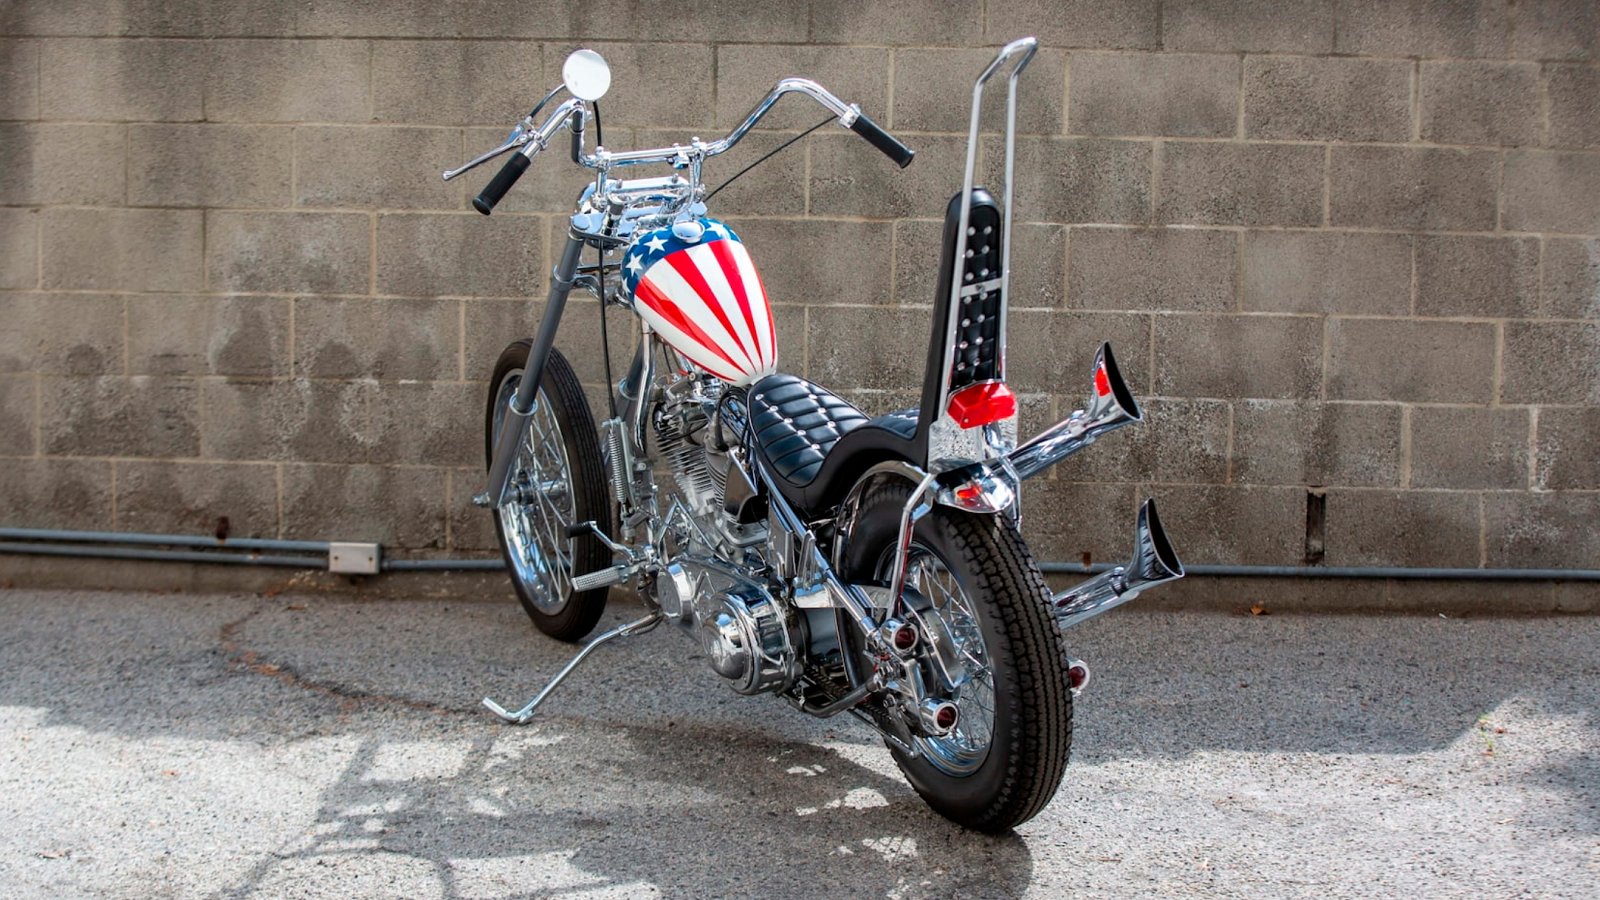 THE ULTIMATE CHOPPER, Both the Captain America bike and the…